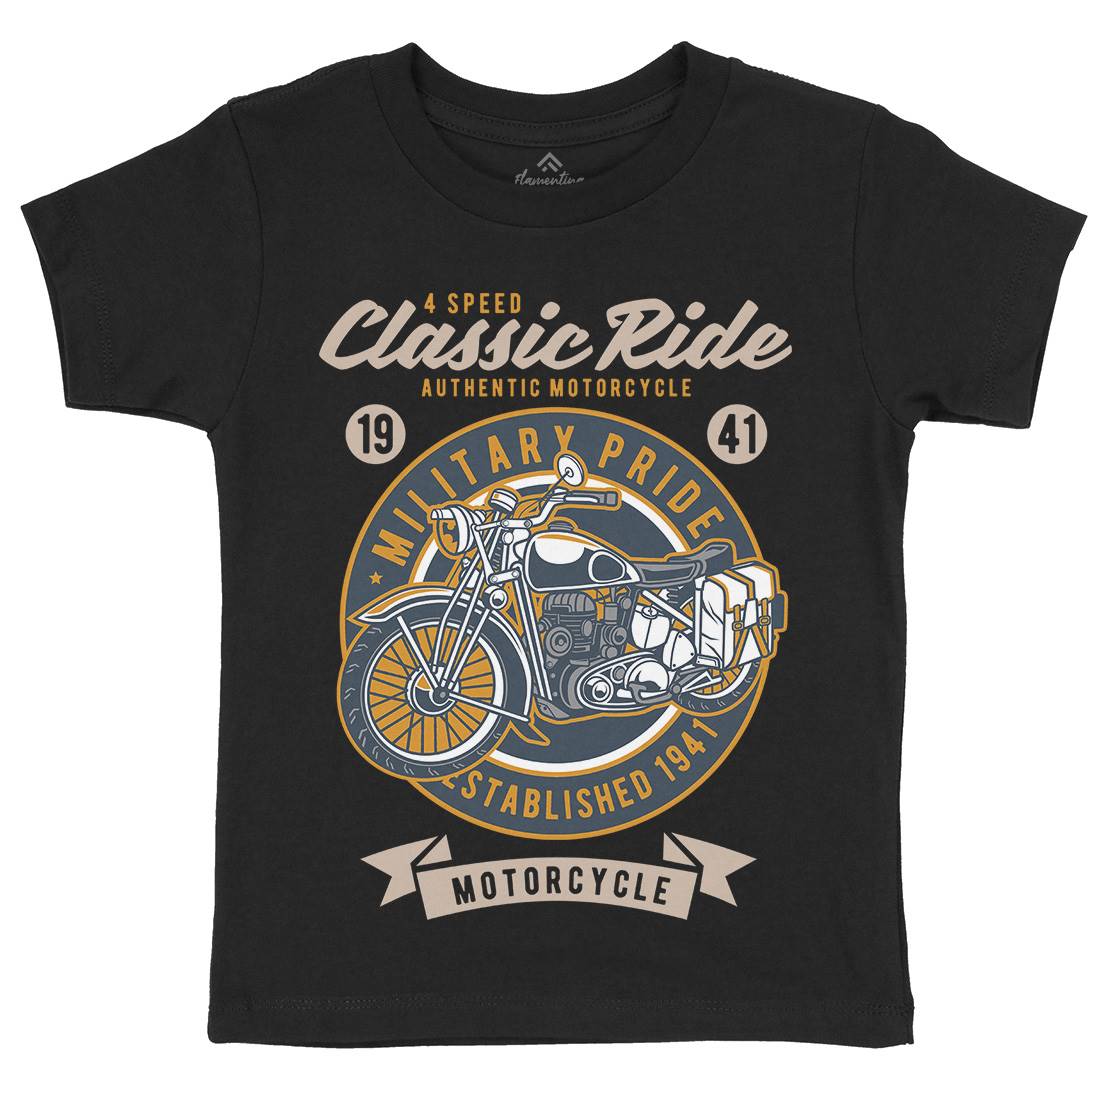 Classic Ride Military Pride Kids Crew Neck T-Shirt Motorcycles D521